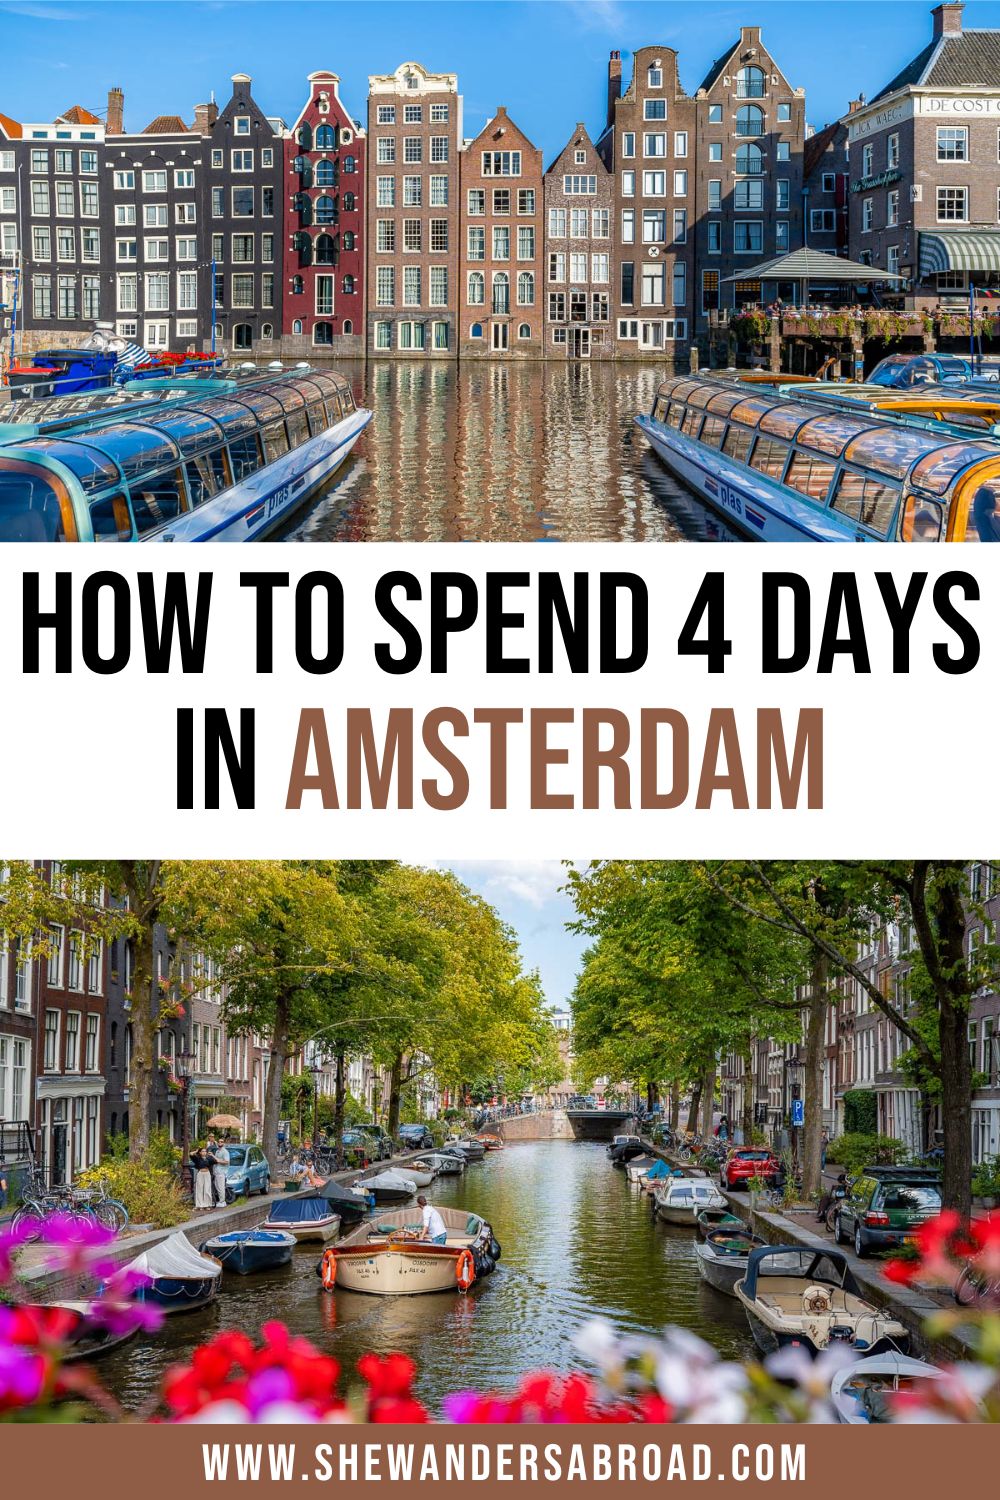 How to Spend 4 Days in Amsterdam: Ultimate Itinerary for First Timers